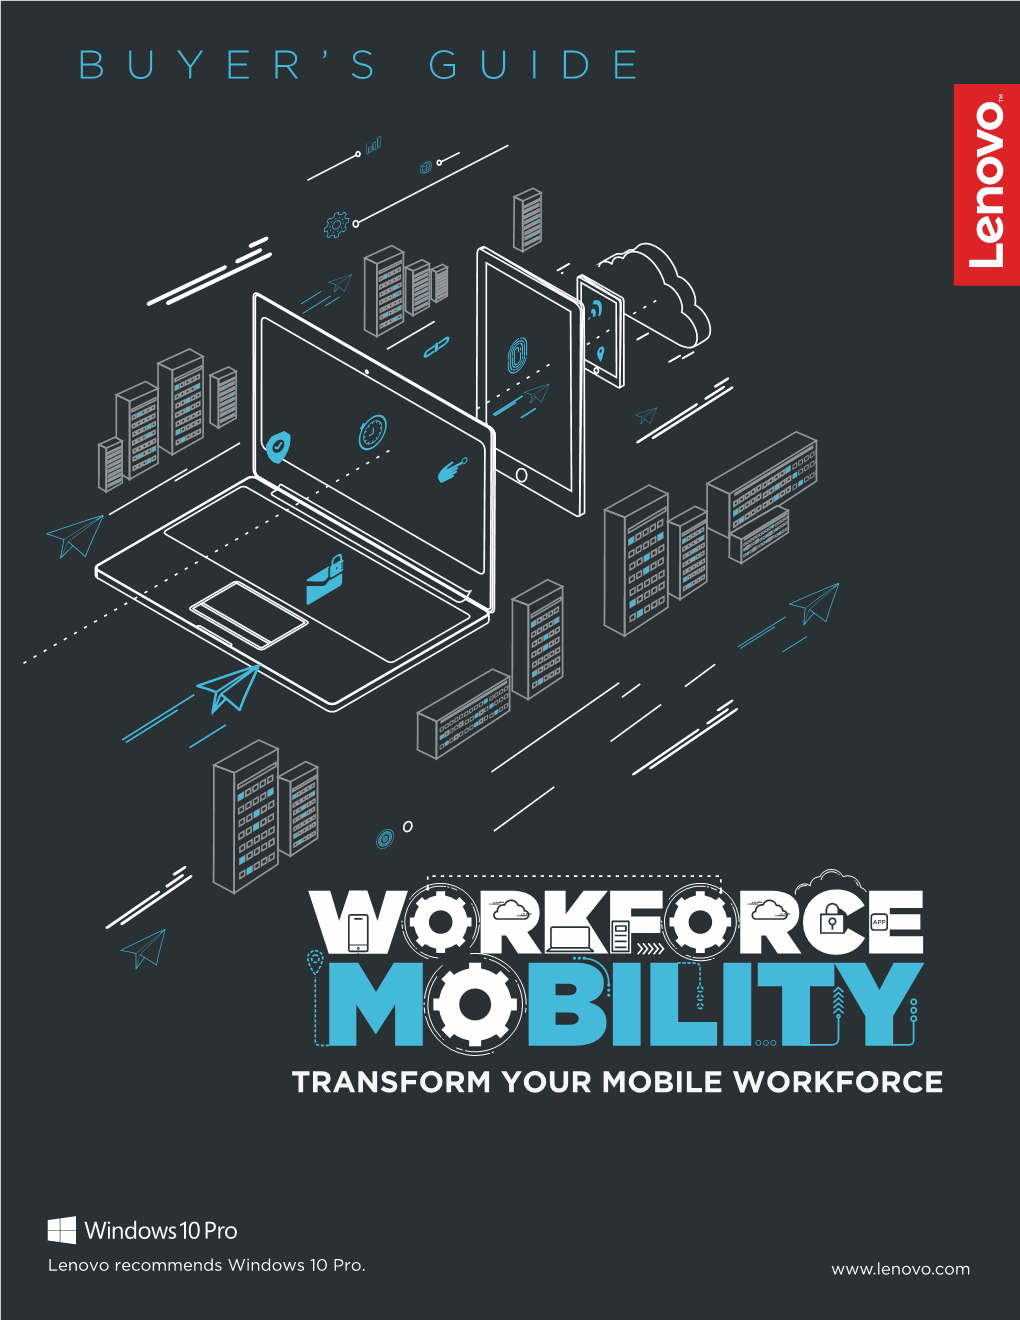 Workforce Mobility Buyers Guide